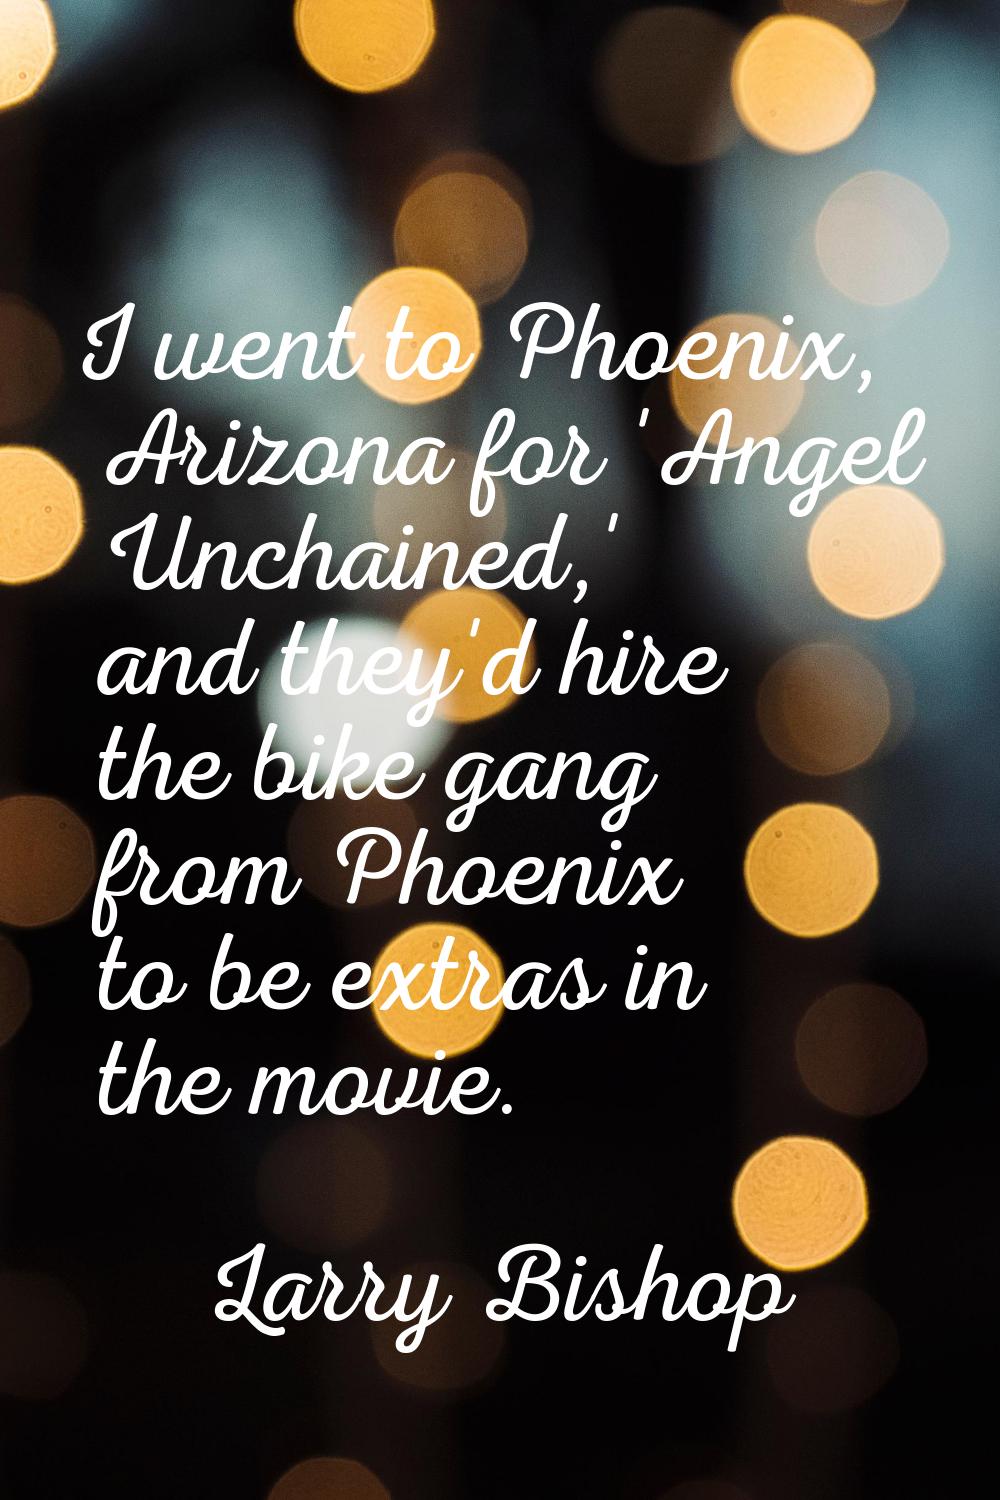 I went to Phoenix, Arizona for 'Angel Unchained,' and they'd hire the bike gang from Phoenix to be 